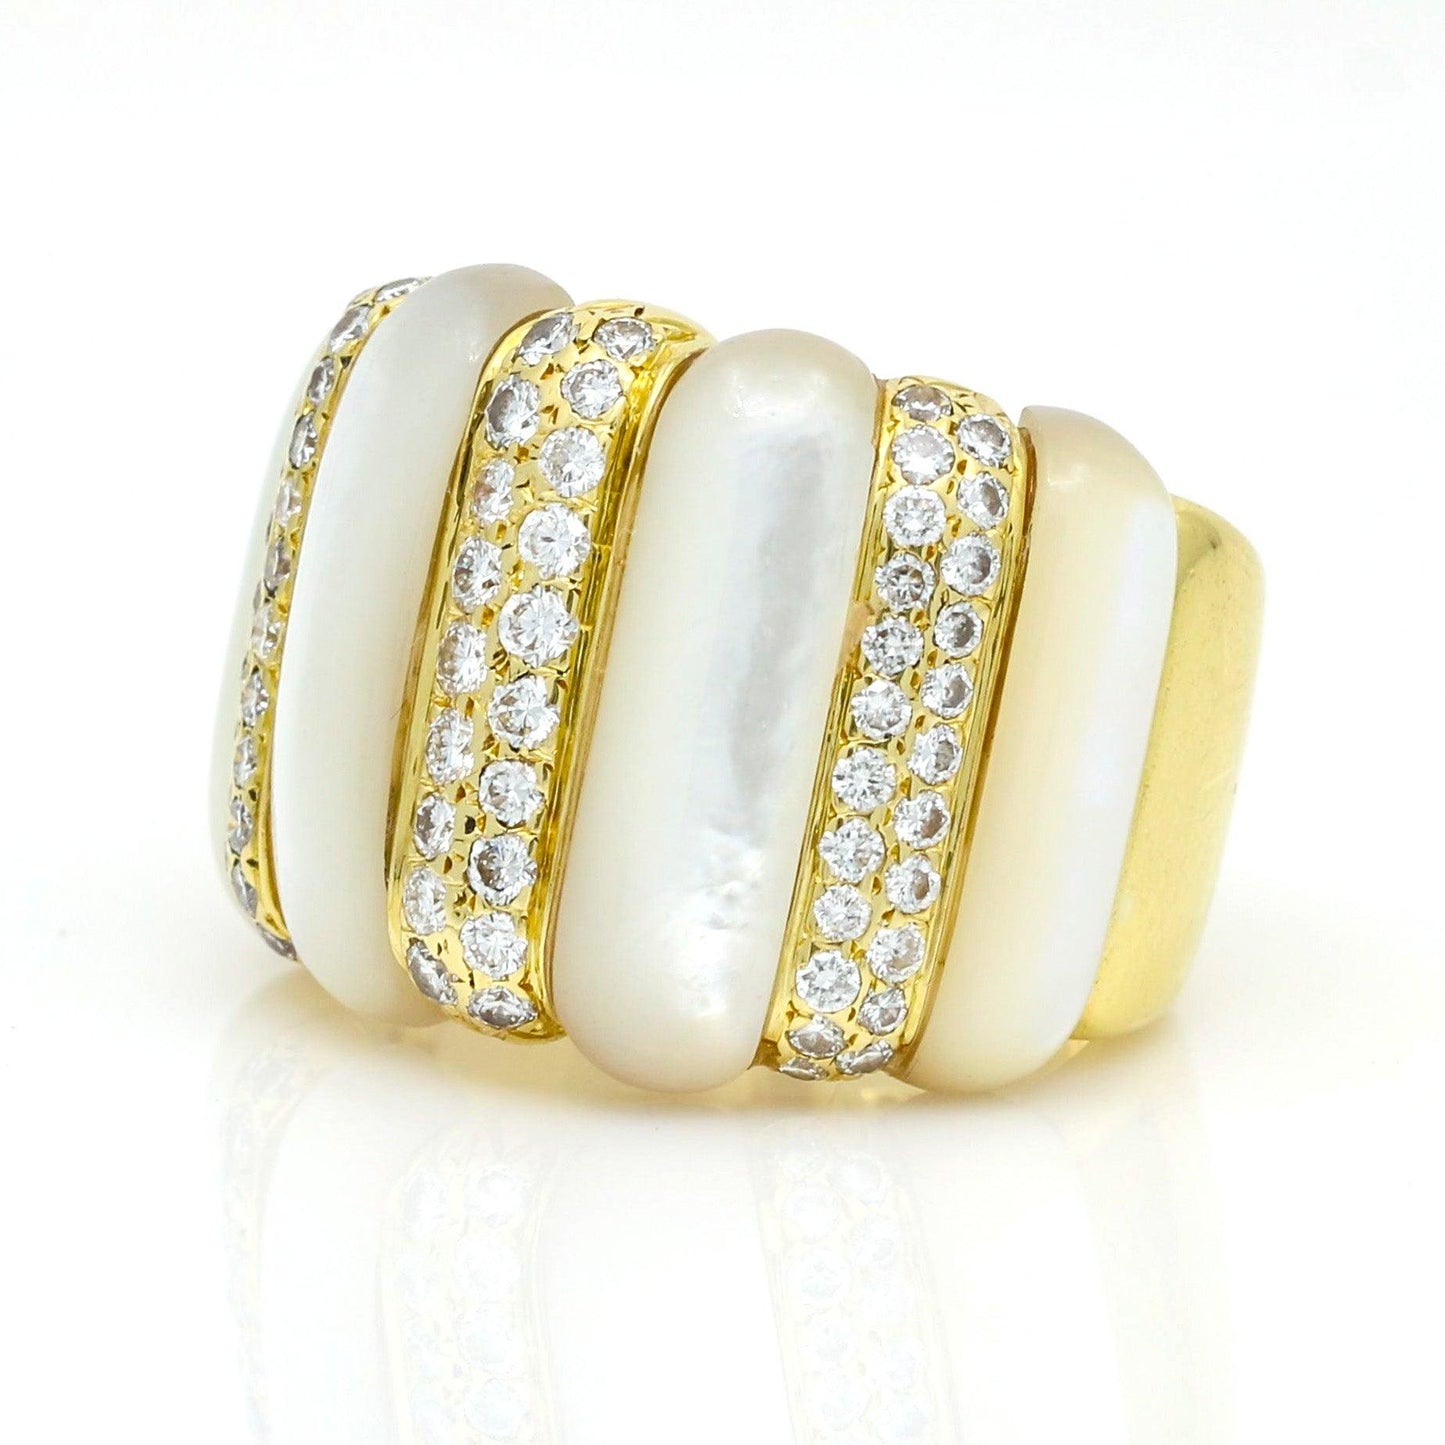 Gemlok Mother of Pearl and Diamond Statement Ring in 18k Yellow Gold - 31 Jewels Inc.